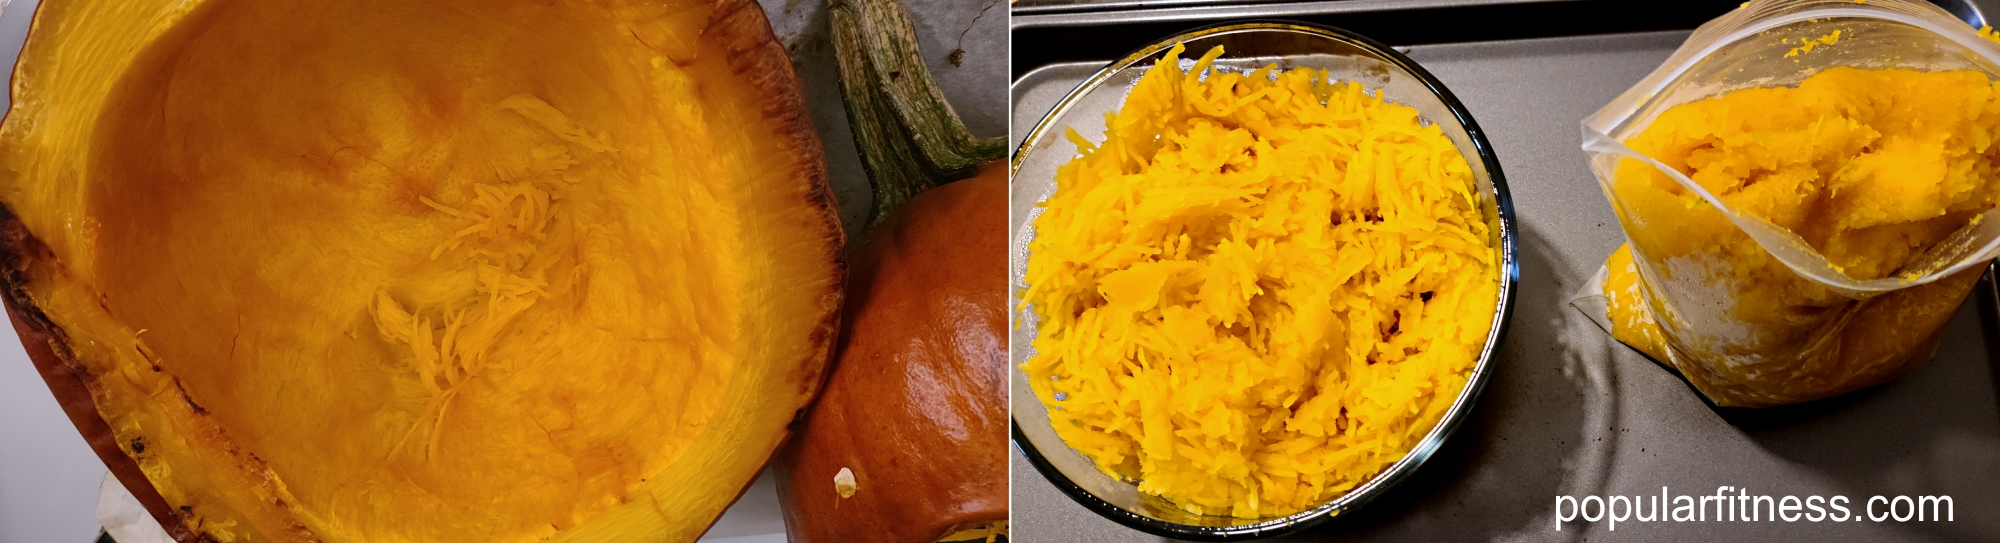 Baked pumpkin, pumpkin pureed for use and put in freezer bag for freezing .